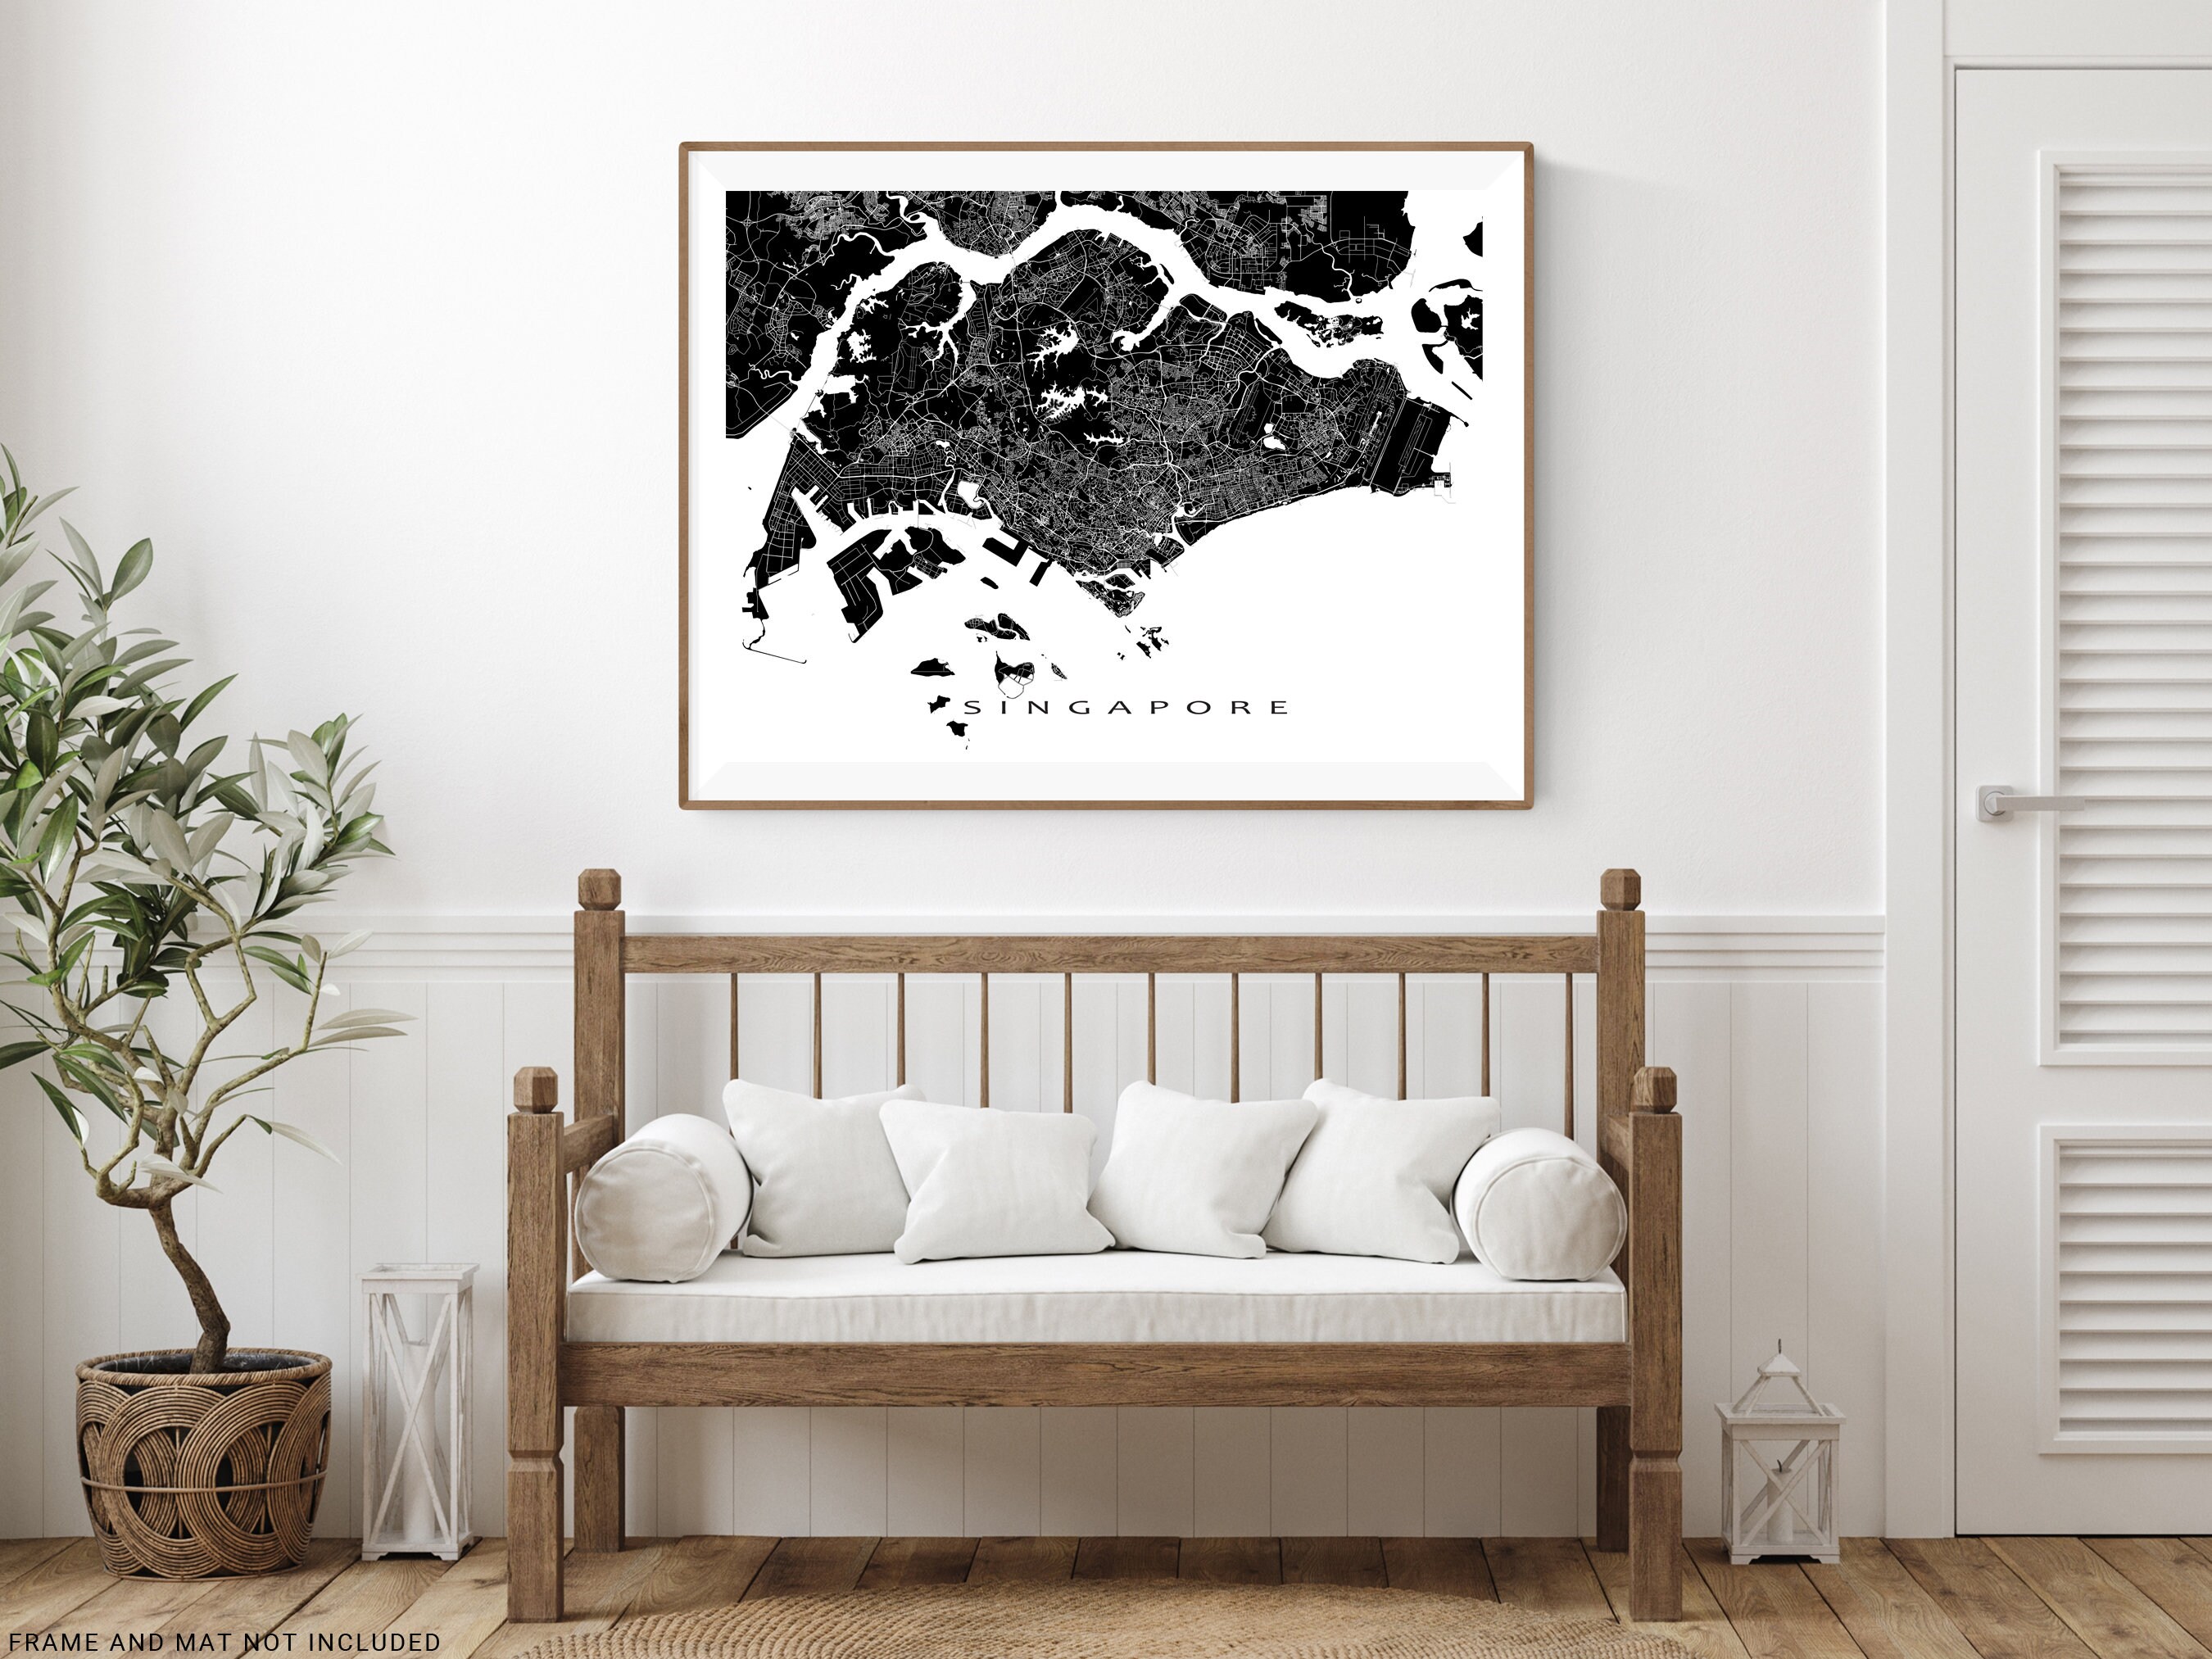 Singapore Map Print Poster, Grid Road Map of Singapore City Street Wall Art  Prints, Southeast Asia Island Country Maps - Etsy